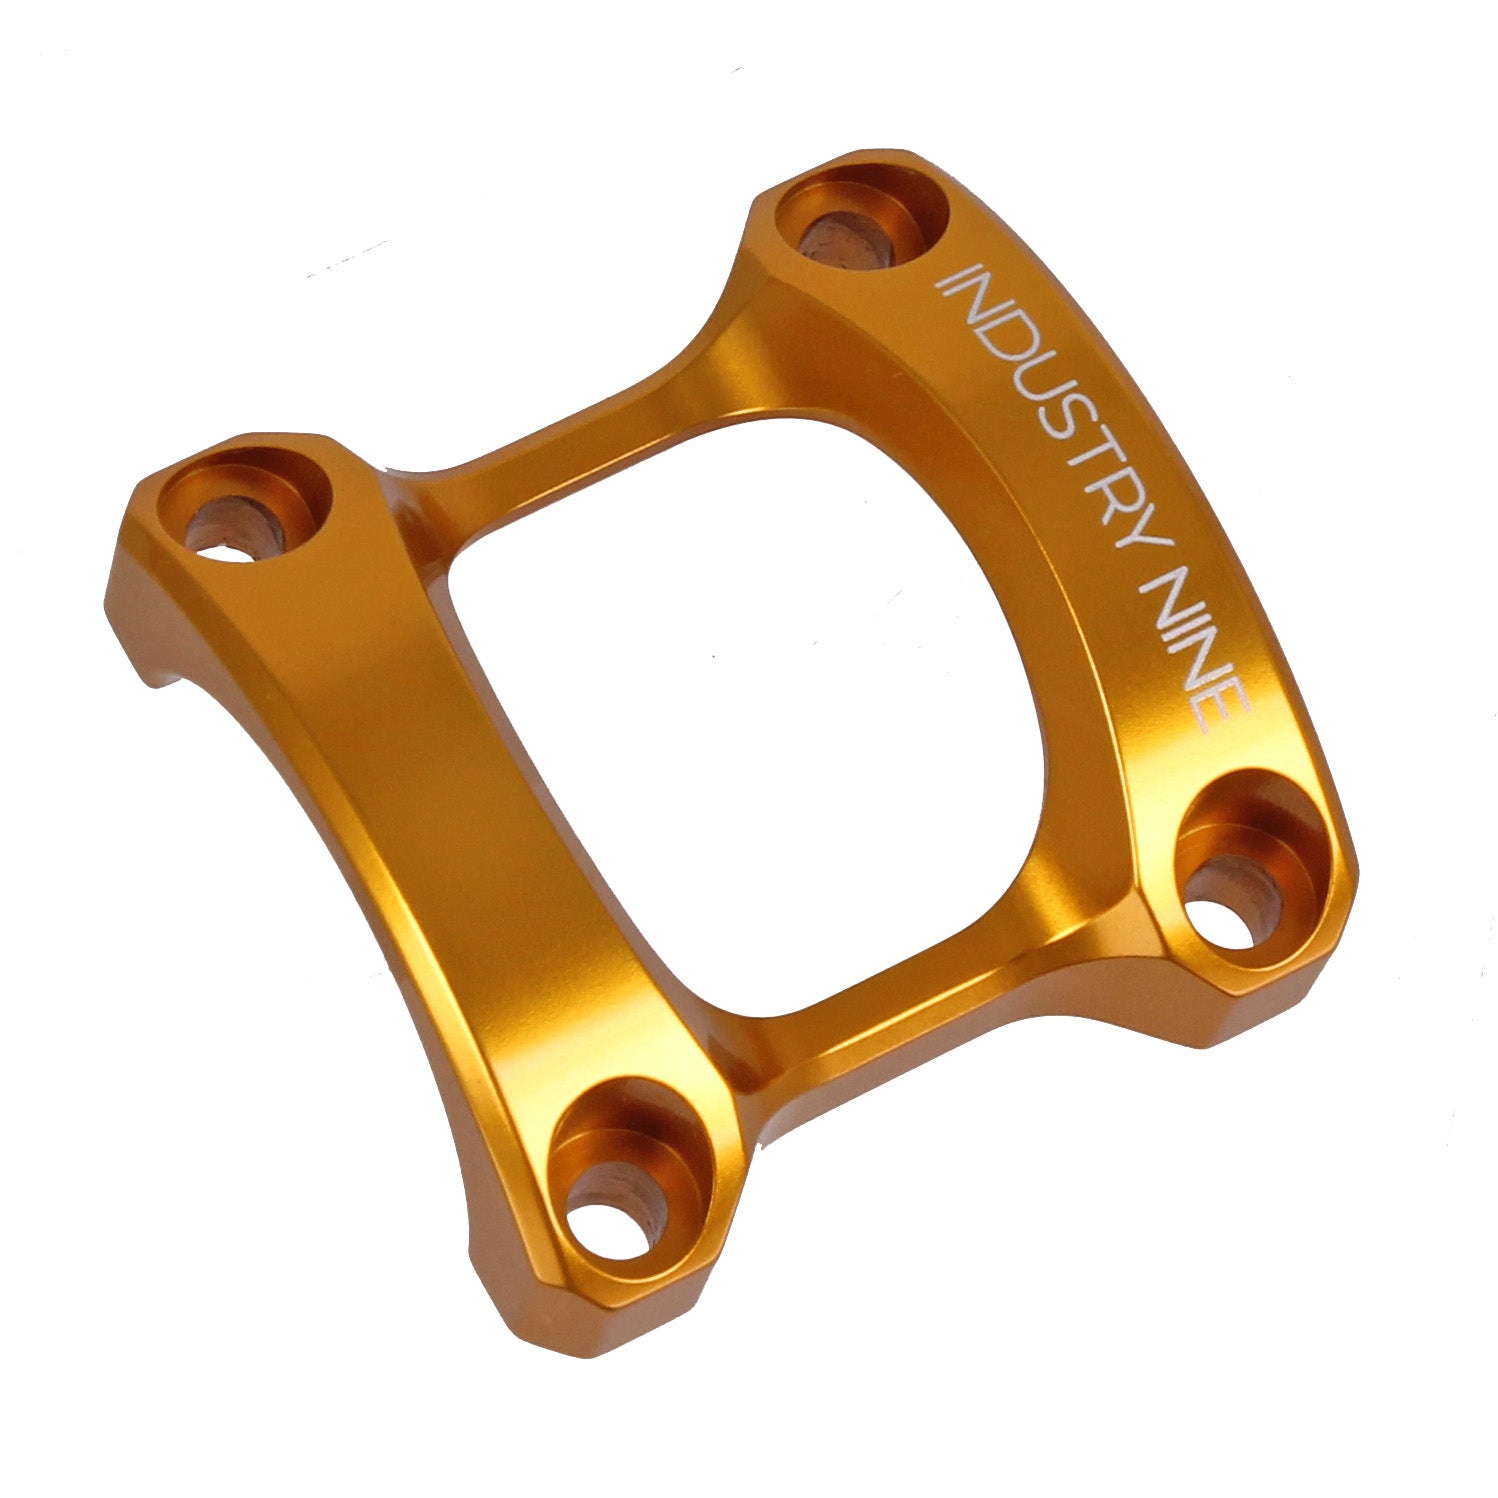 Industry Nine A35 Stem Faceplate Gold